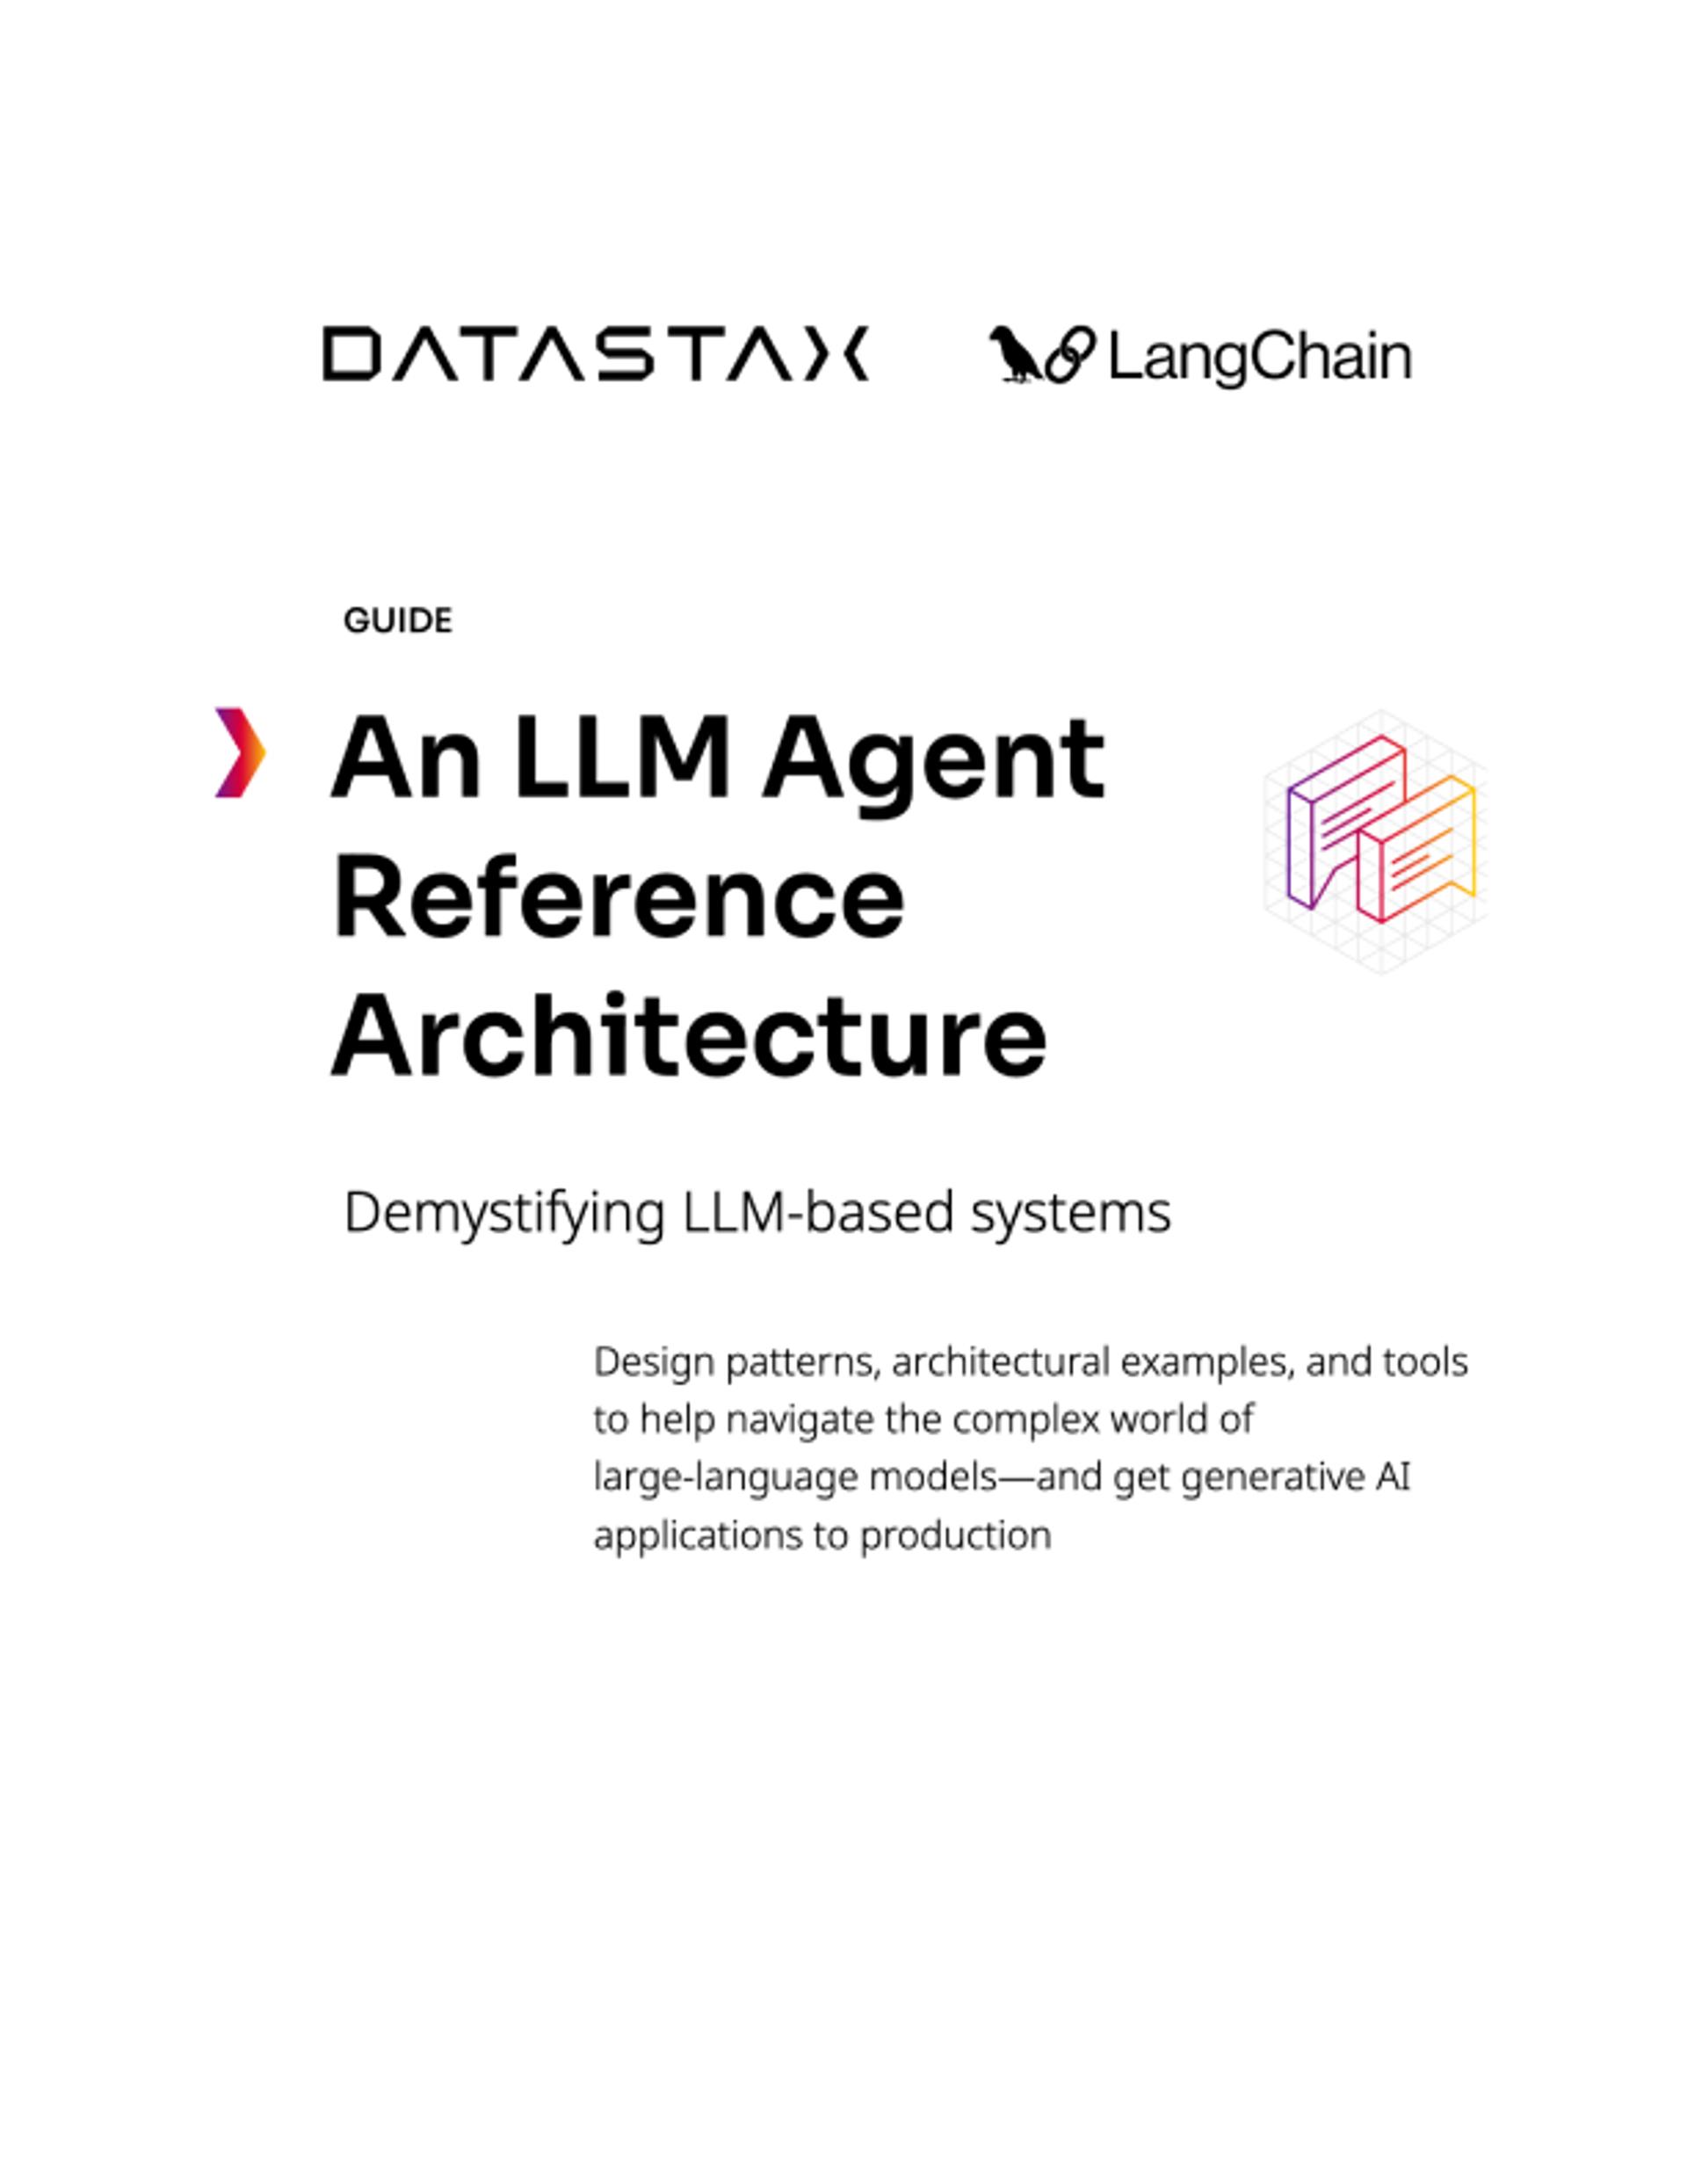 Reference Architecture: Demystifying LLM-based Systems | DataStax